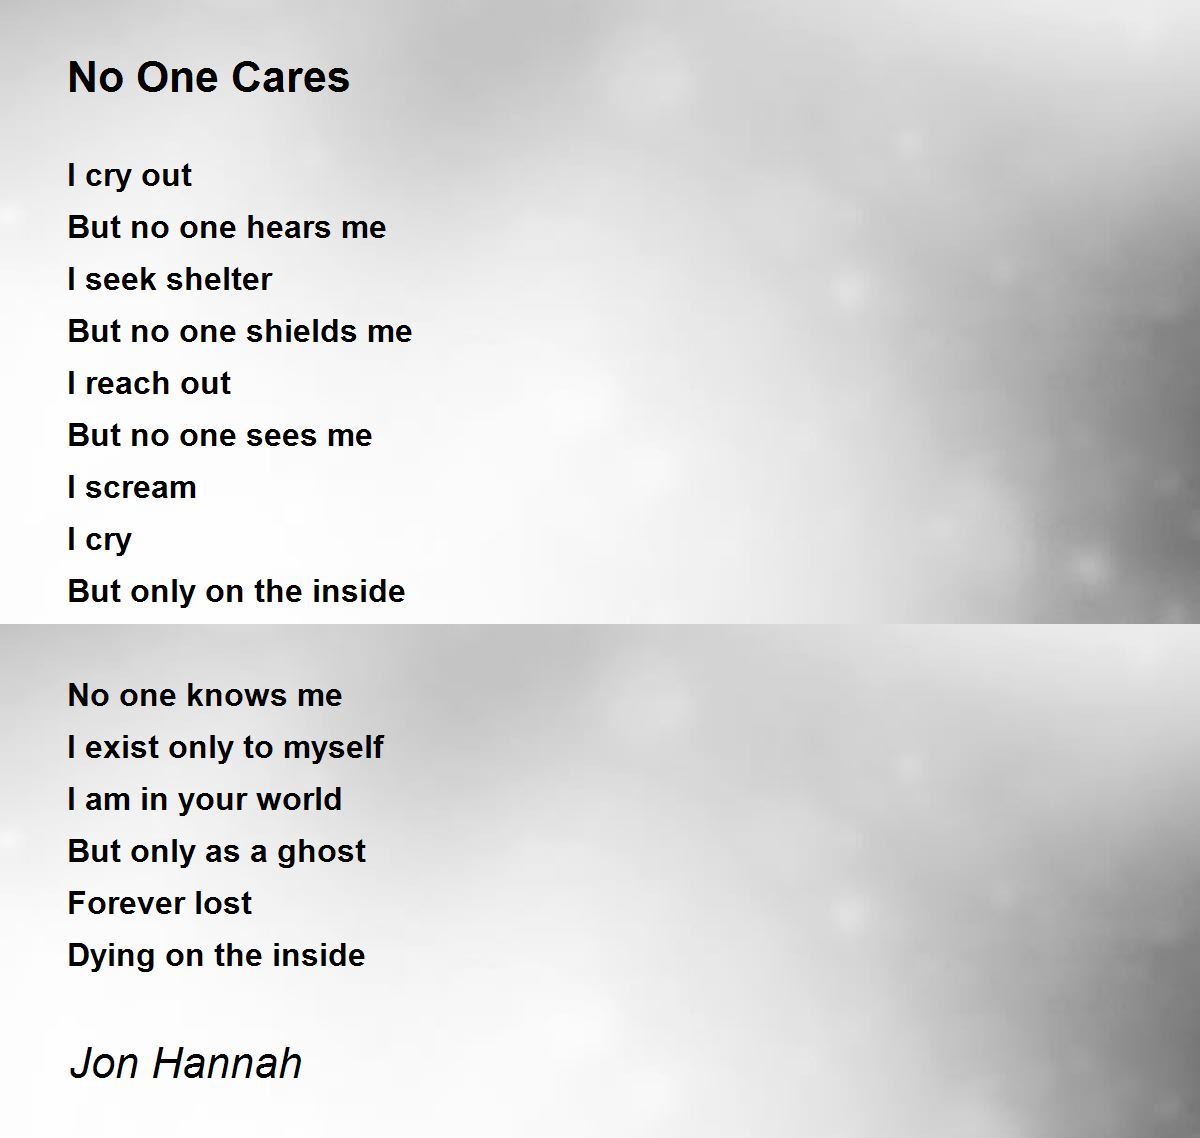 No One Cares - No One Cares Poem by Jon Hannah